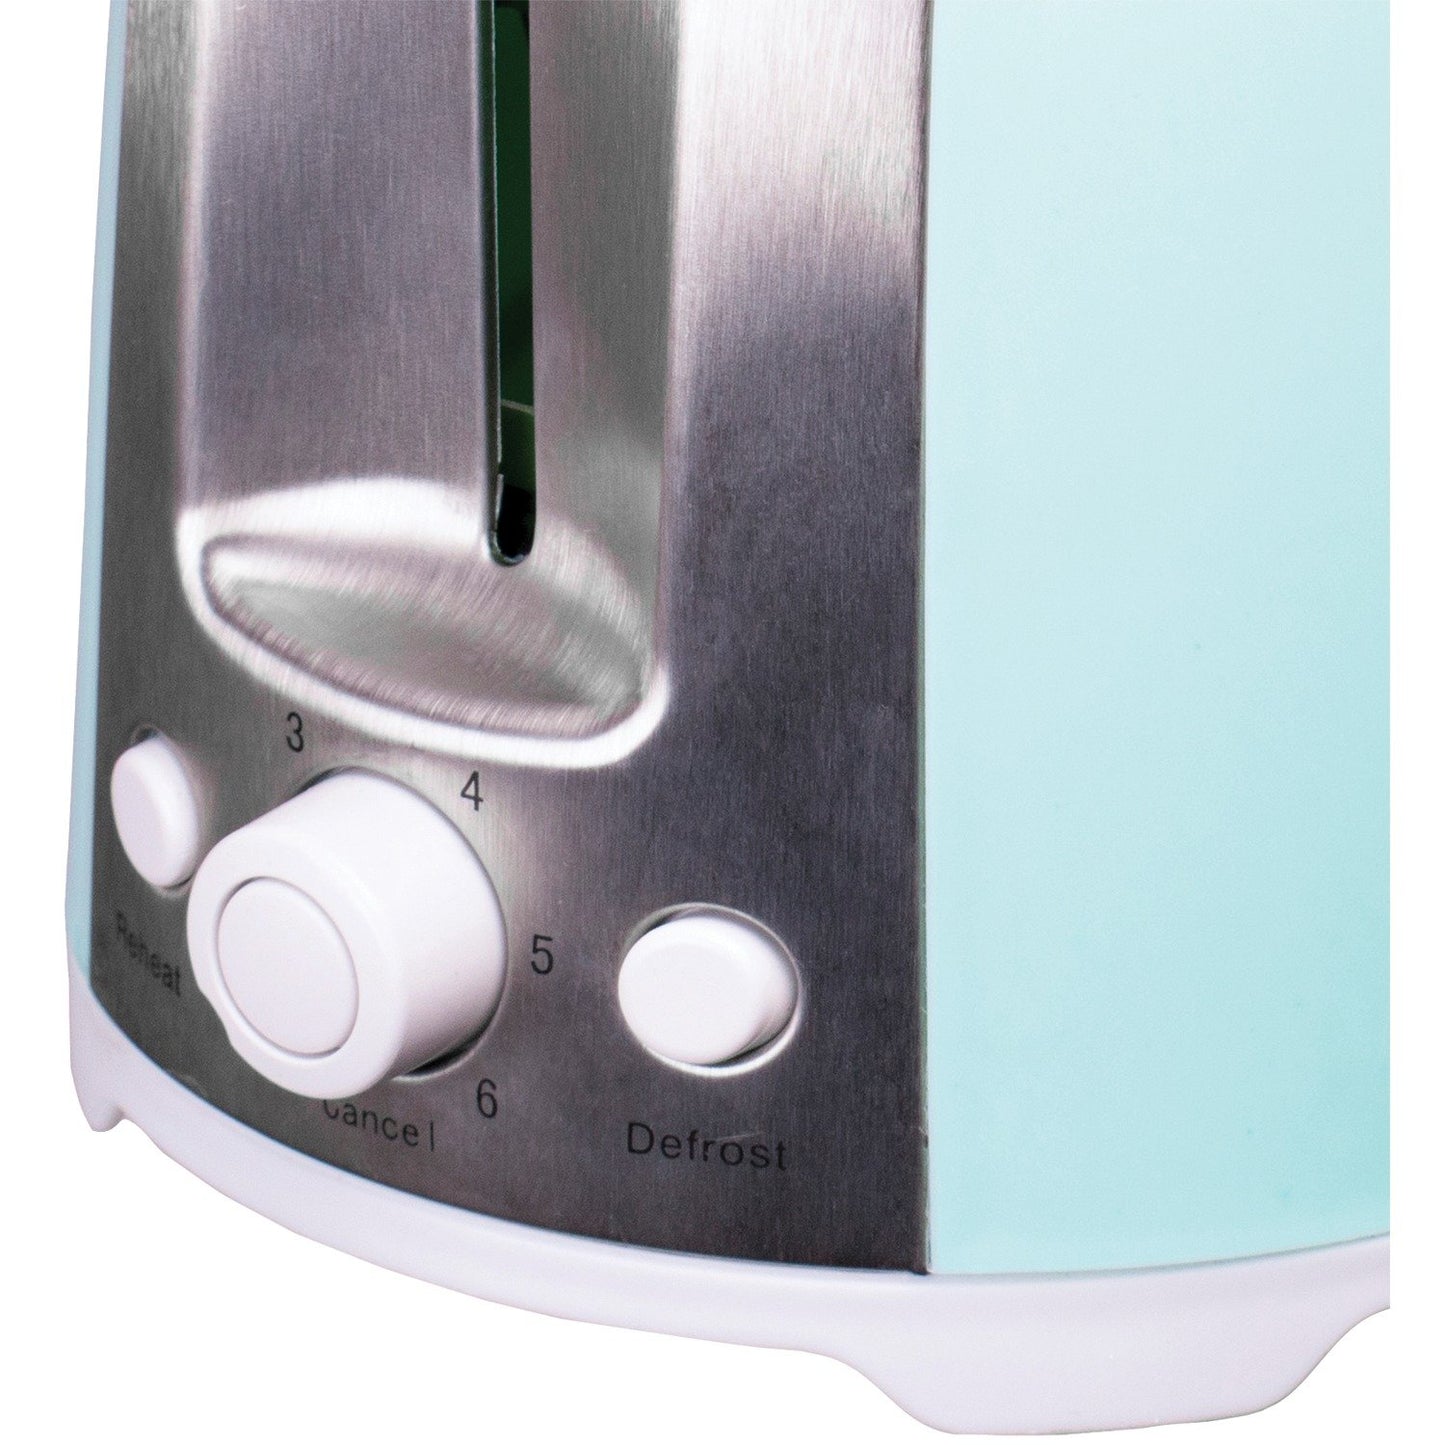 BRENTWOOD TS-292BL 2-Slice X-Wide Toaster (Blue)